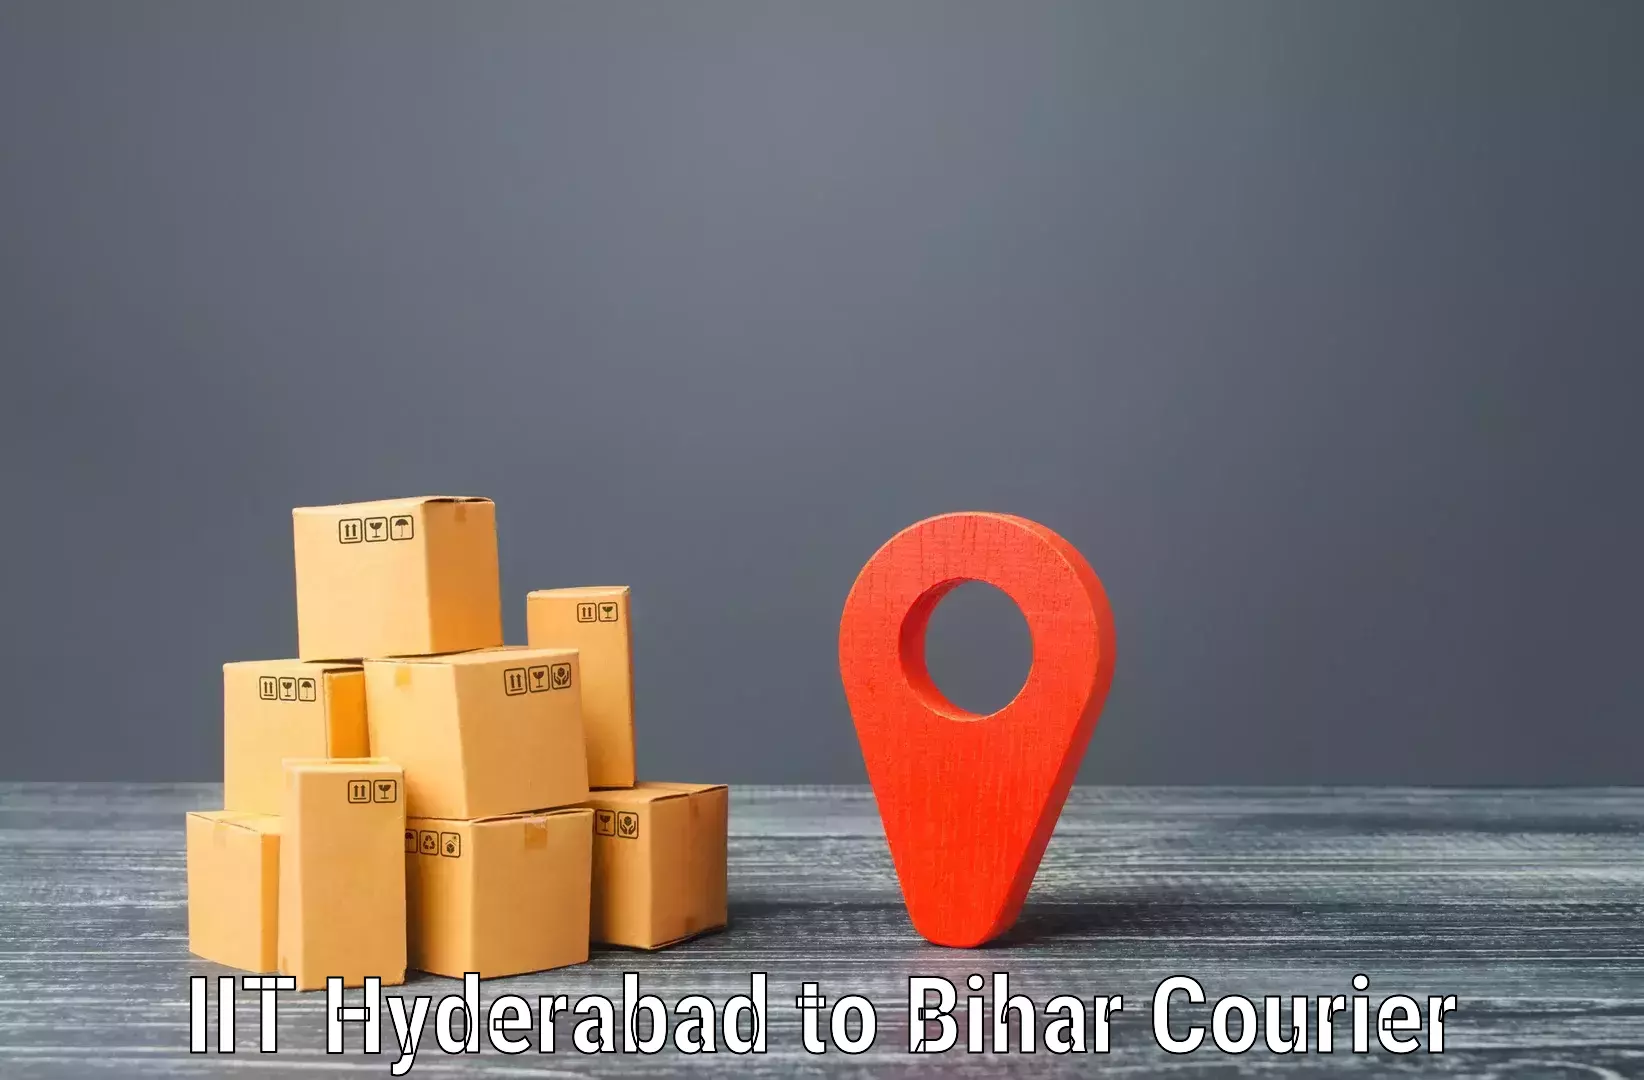 Reliable courier service IIT Hyderabad to Sharfuddinpur